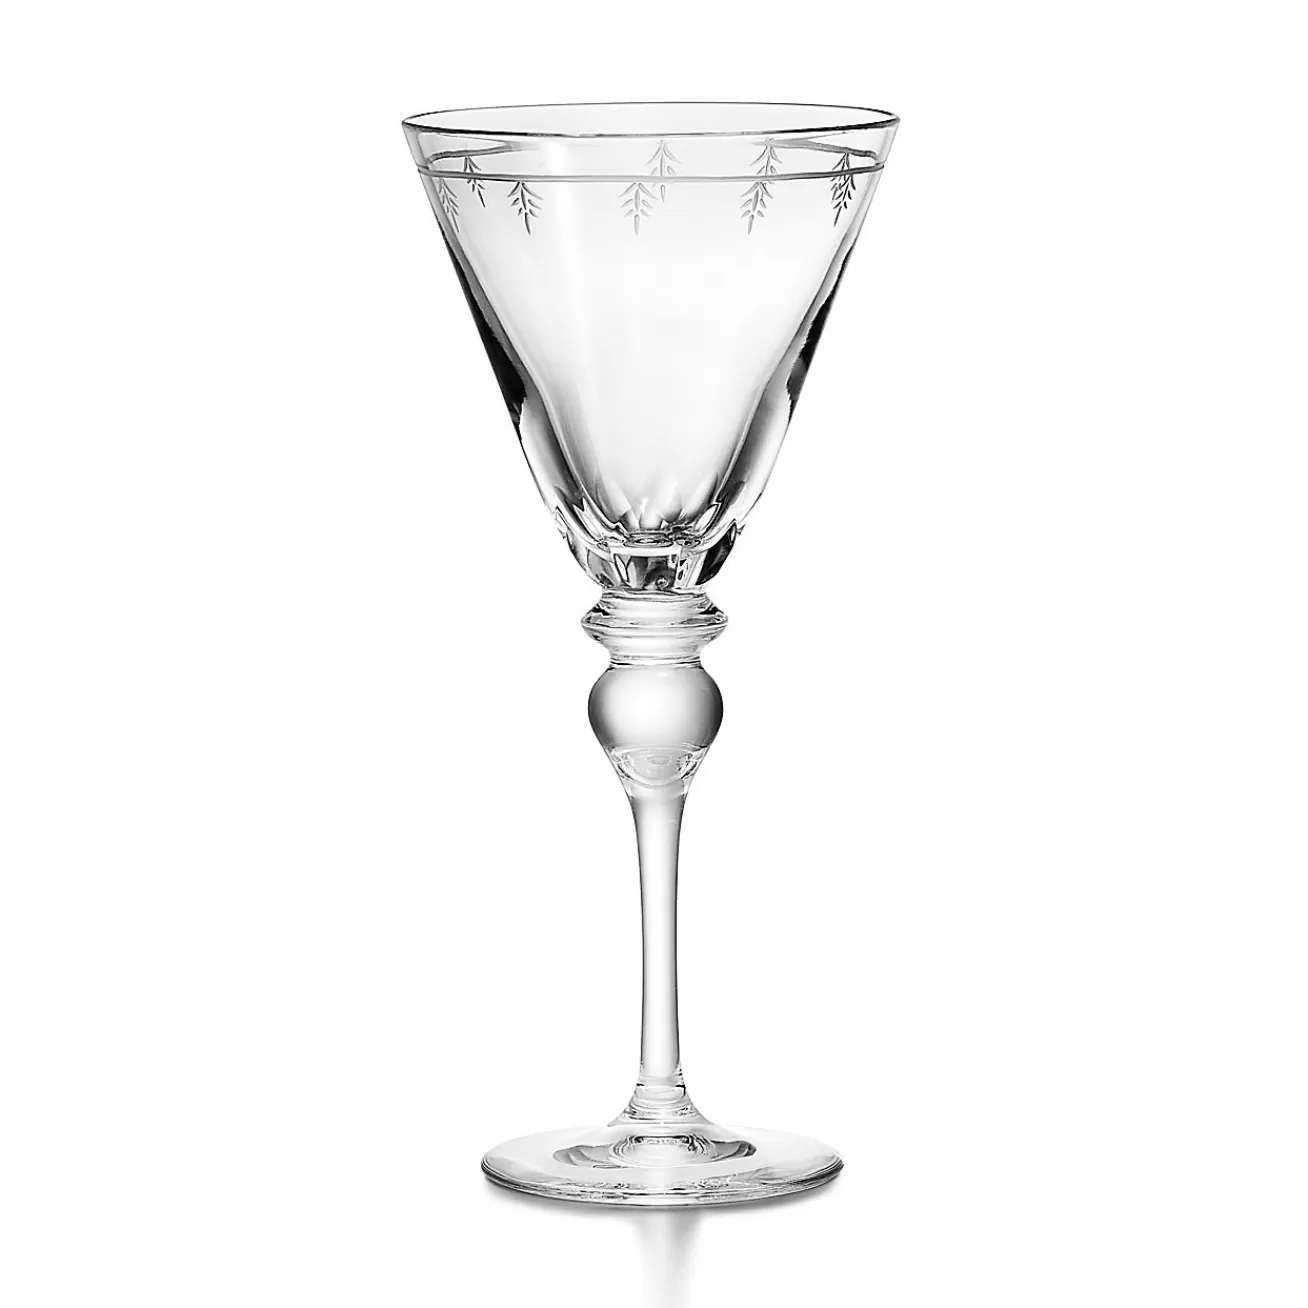 Tiffany & Co. Tiffany Crest Red Wine Glass in Crystal Glass | ^ The Home | Housewarming Gifts